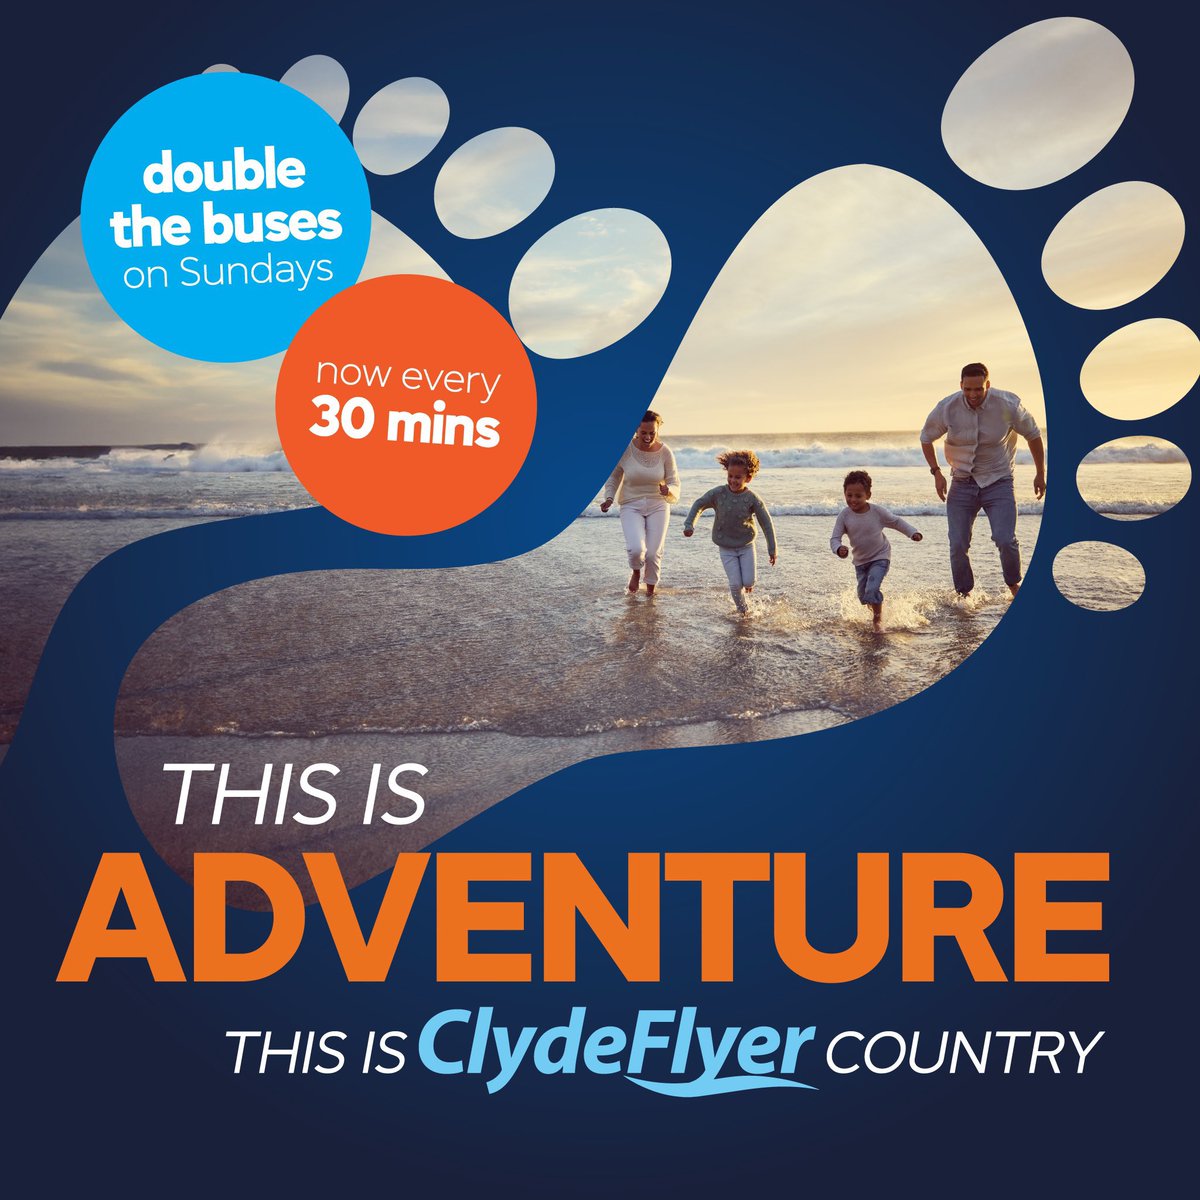 ☀️ Get ready for a big summer on #ClydeFlyer 901/906 from tomorrow! ⏫ Double the buses on Sundays: every 30 mins Glasgow-Greenock-Largs ⏰ Extra buses every 15 mins Mon-Sat Greenock-Lunderston Bay 🌆 Last bus from Glasgow 11pm Thu/Fri/Sat ℹ️ mcgillsbuses.co.uk/adventure-clyd…